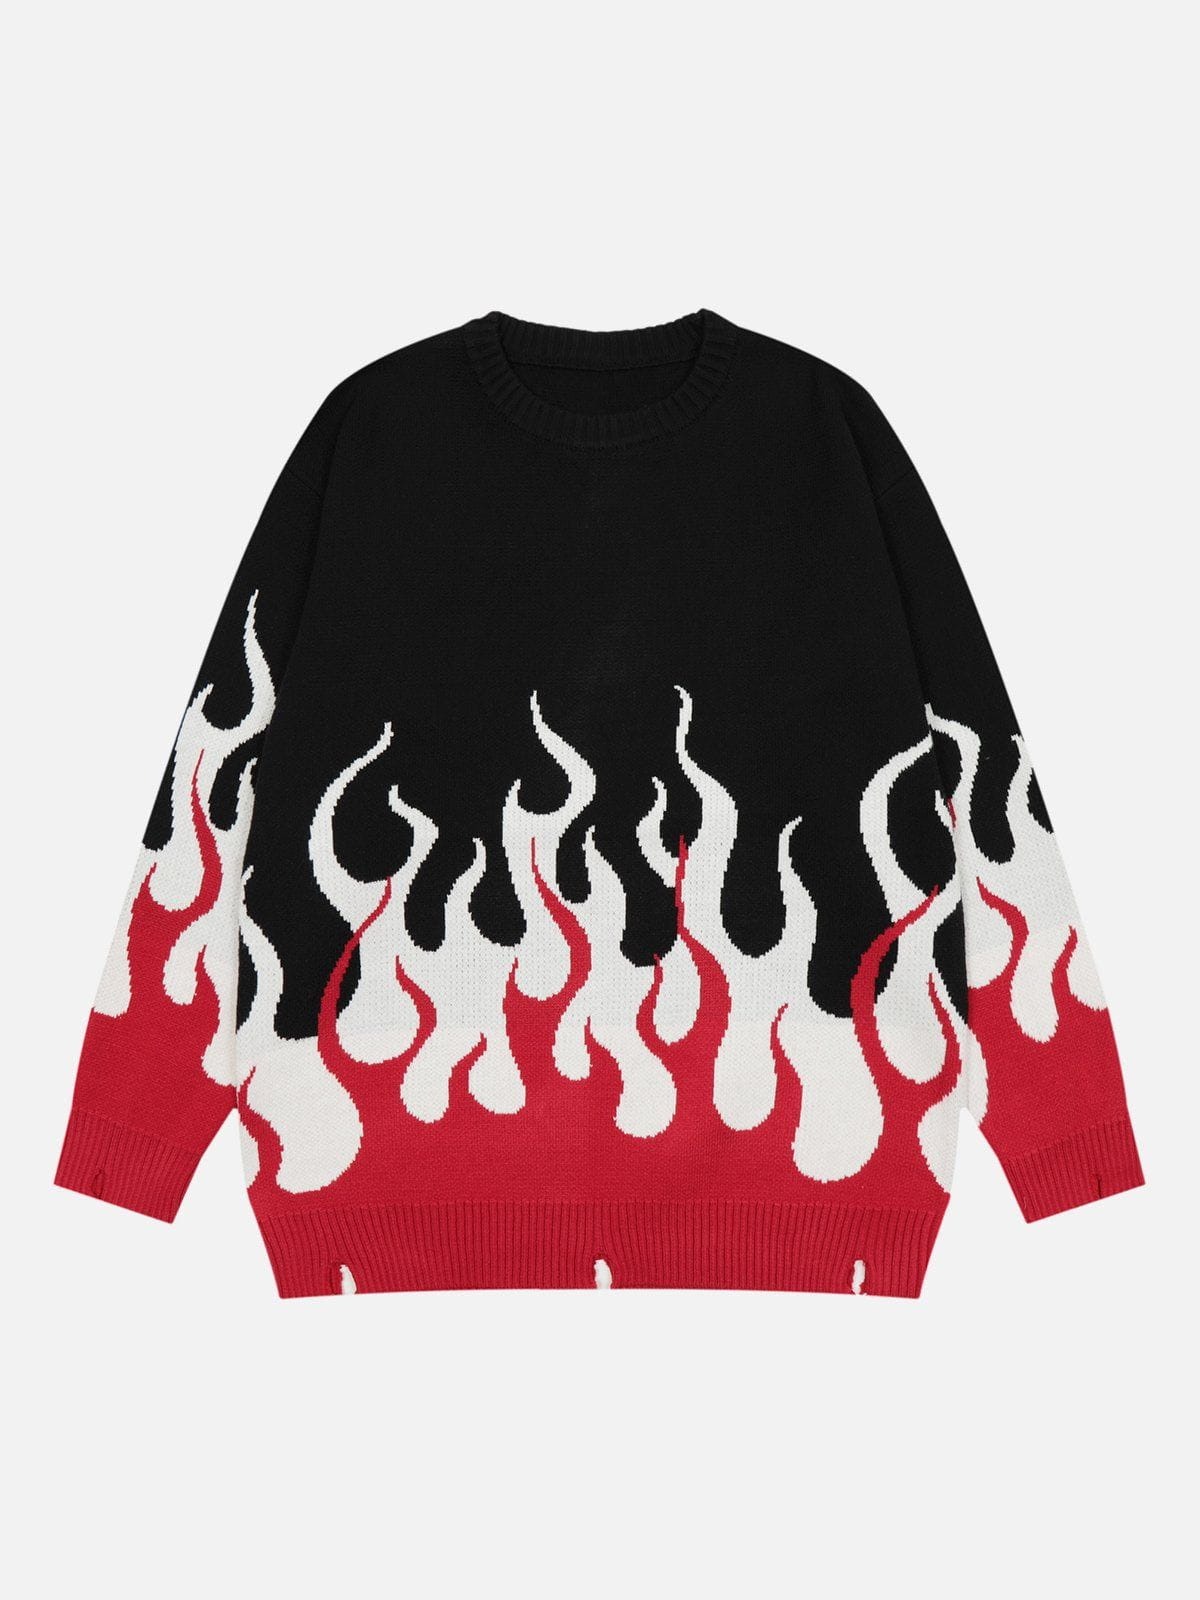 Aelfric Eden Double Flame Knit Sweater – Aelfric eden